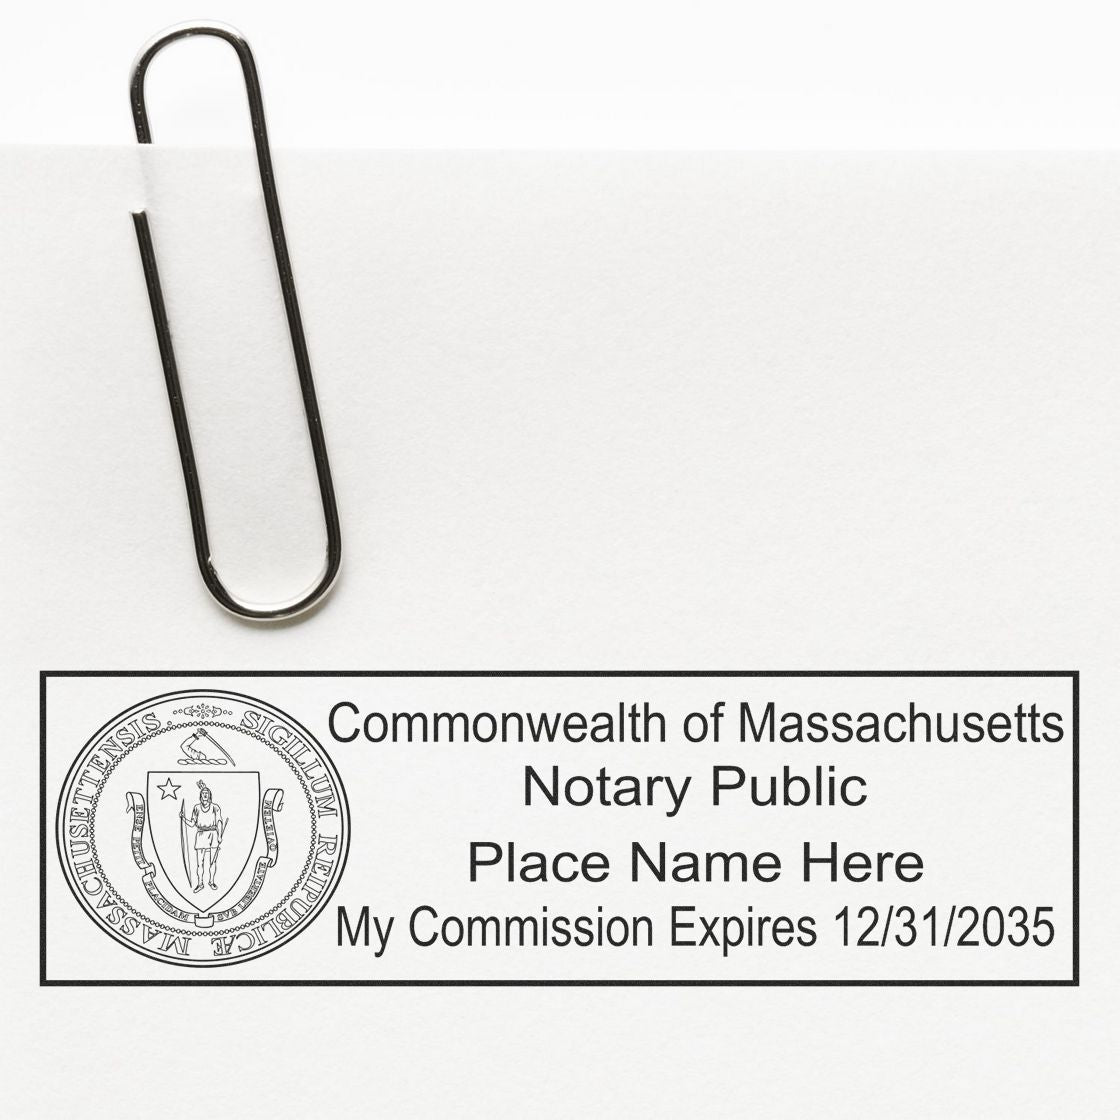 PSI Massachusetts Notary Stamp in use photo showing a stamped imprint of the PSI Massachusetts Notary Stamp